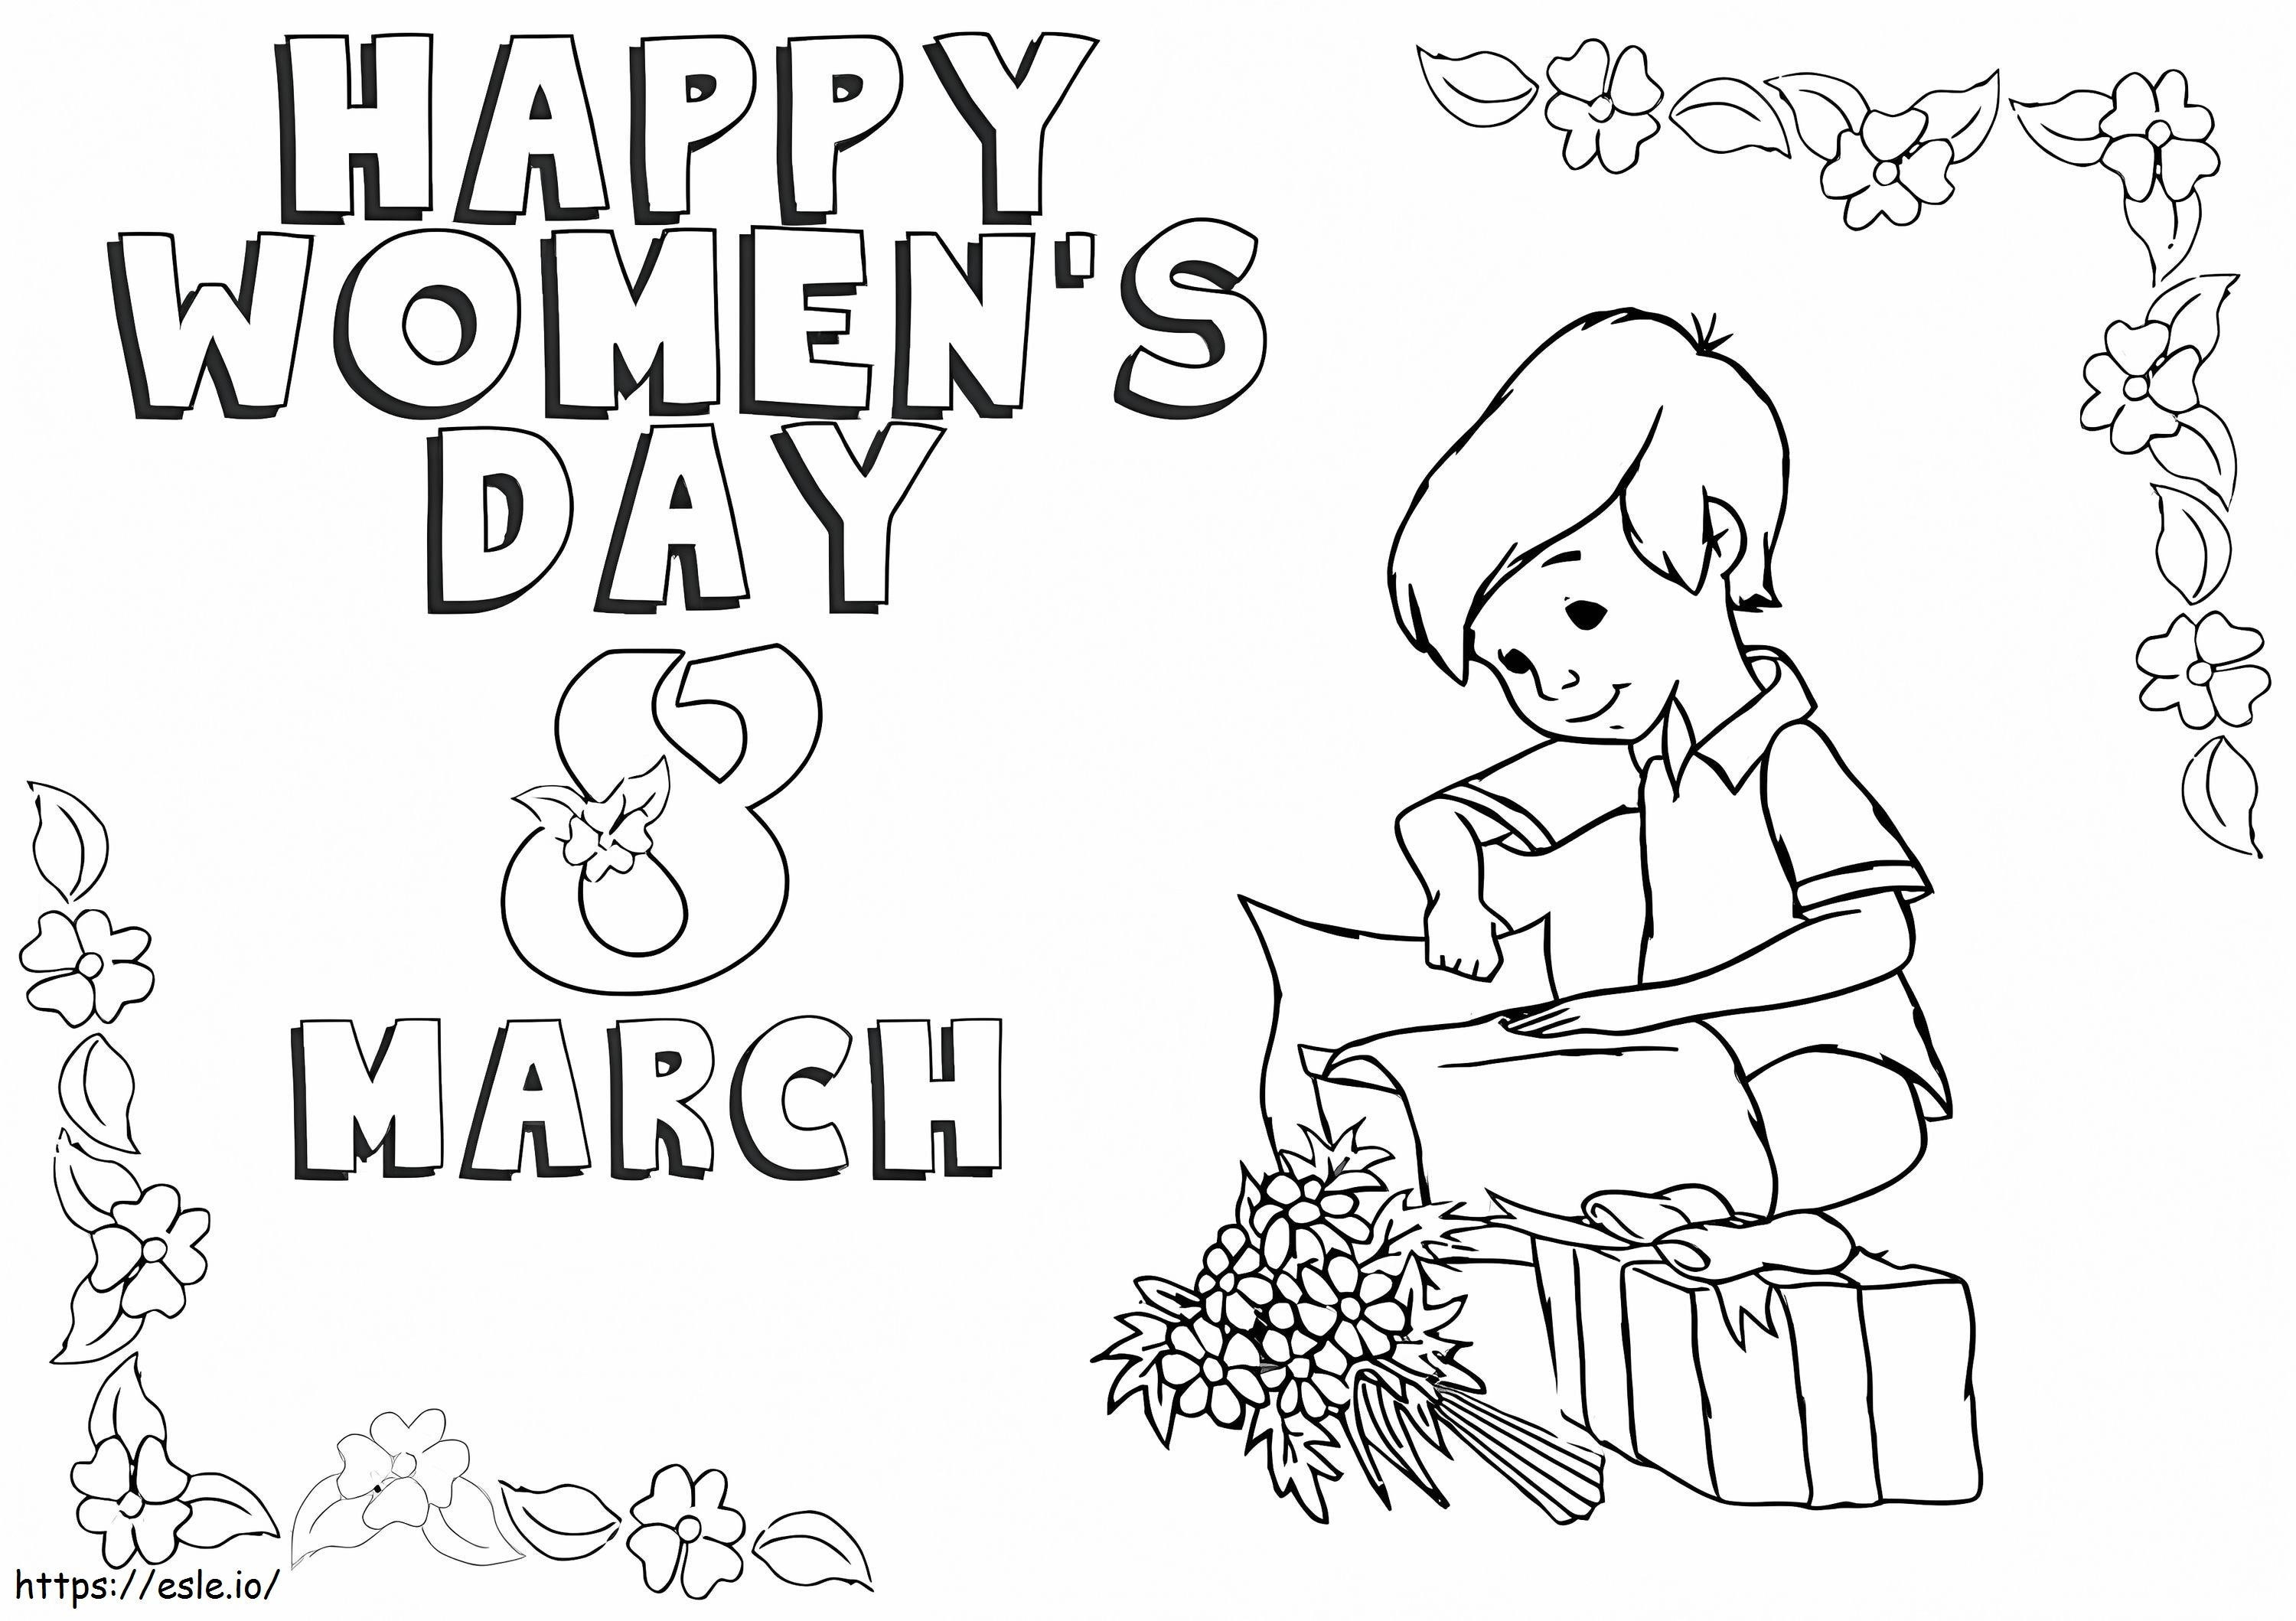 Women'S Day March 1 coloring page